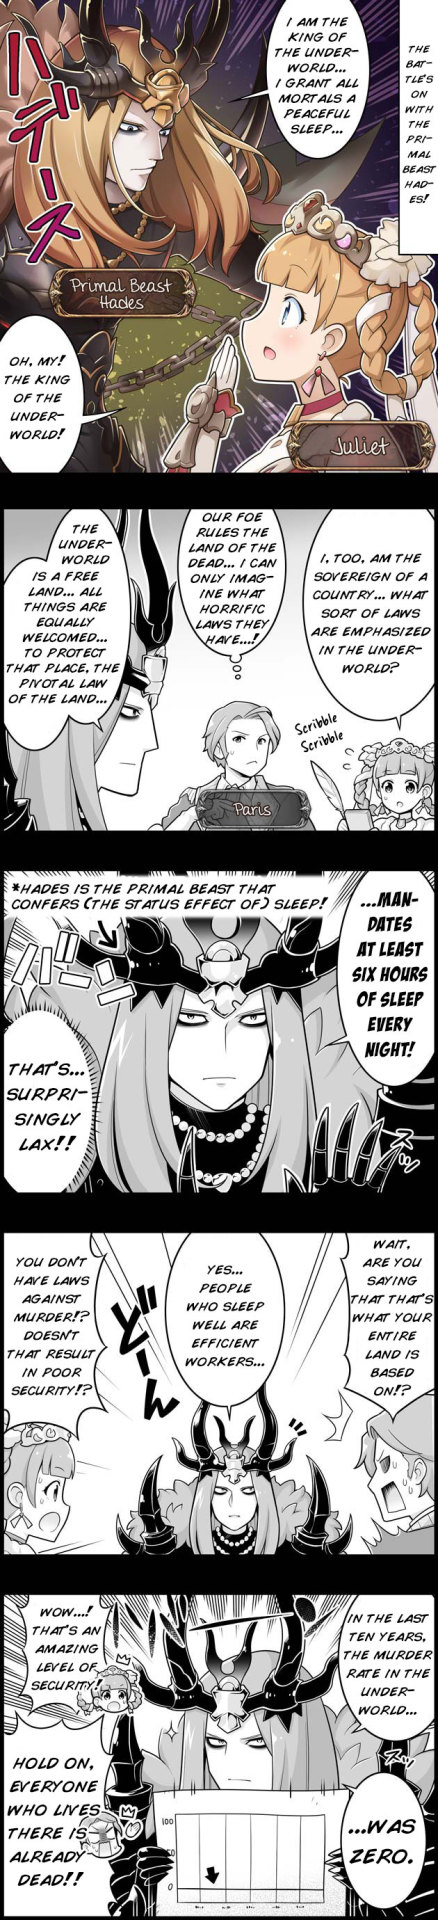 Grand Blues! Ch. 1244 Hades, King of the Underworld!